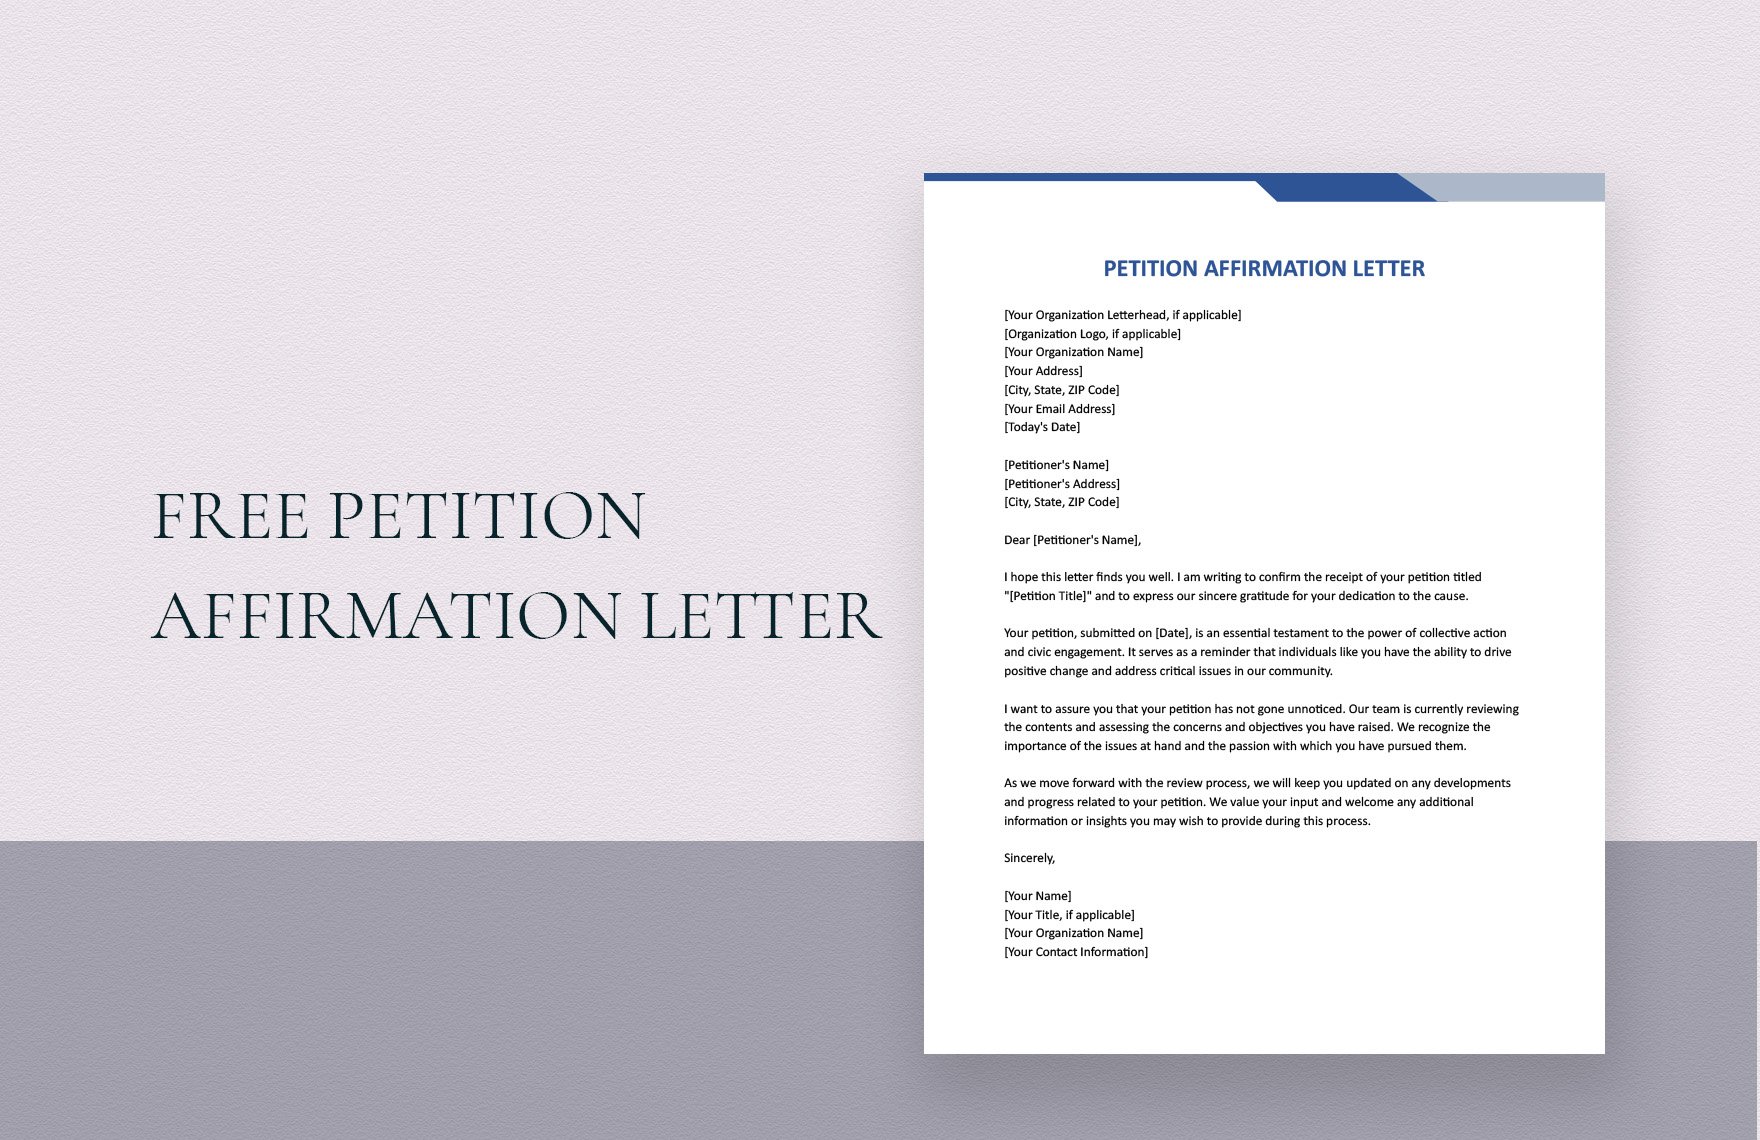 Petition Affirmation Letter in Word, Google Docs